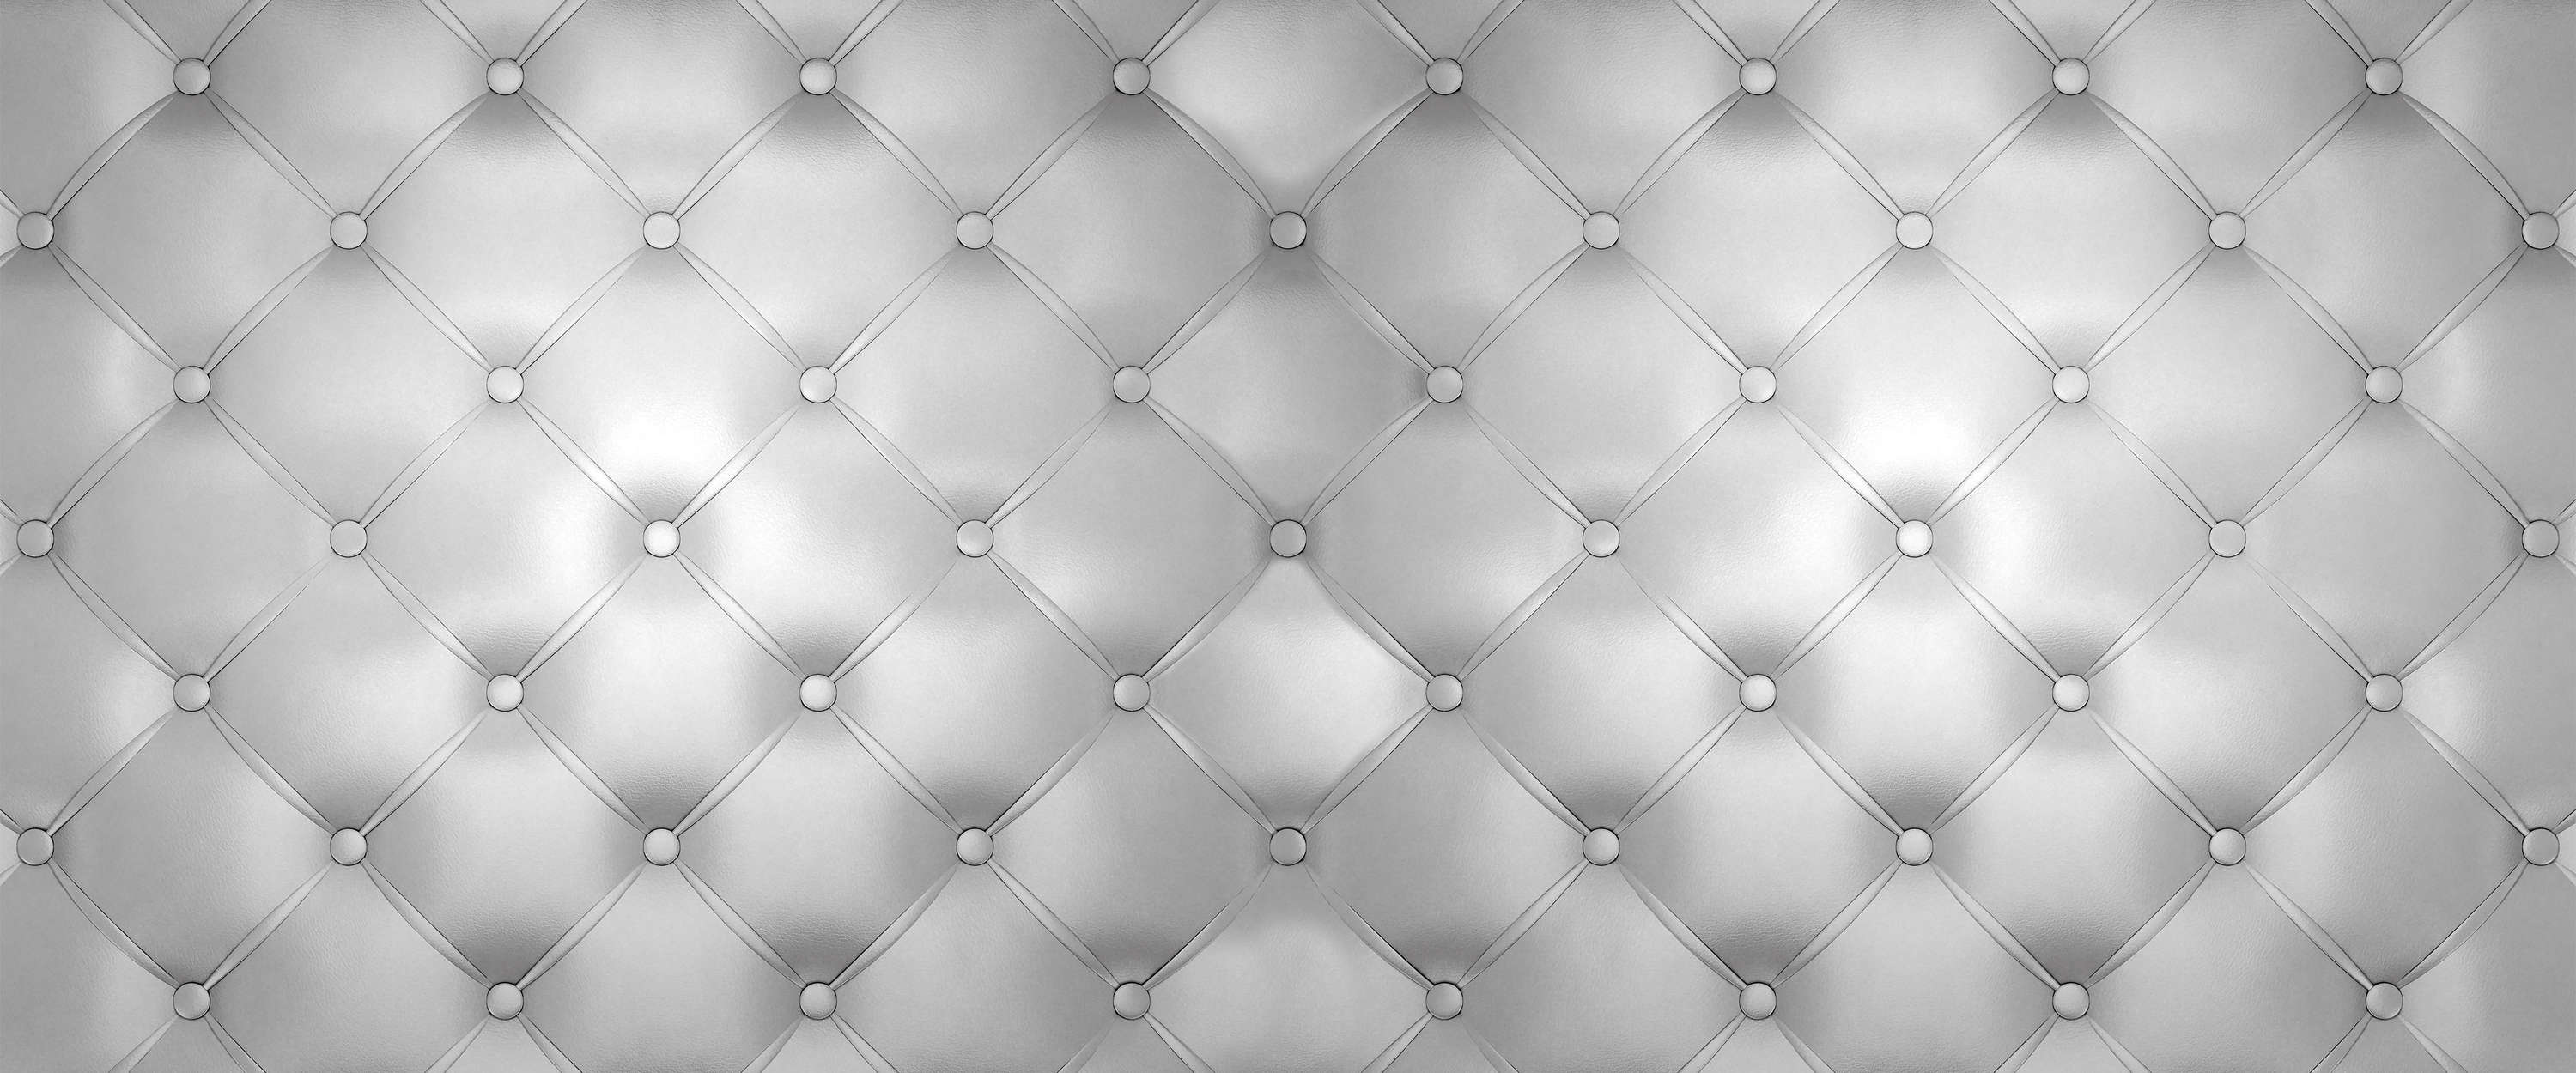             3D photo wallpaper upholstery look silver grey with diamond pattern
        